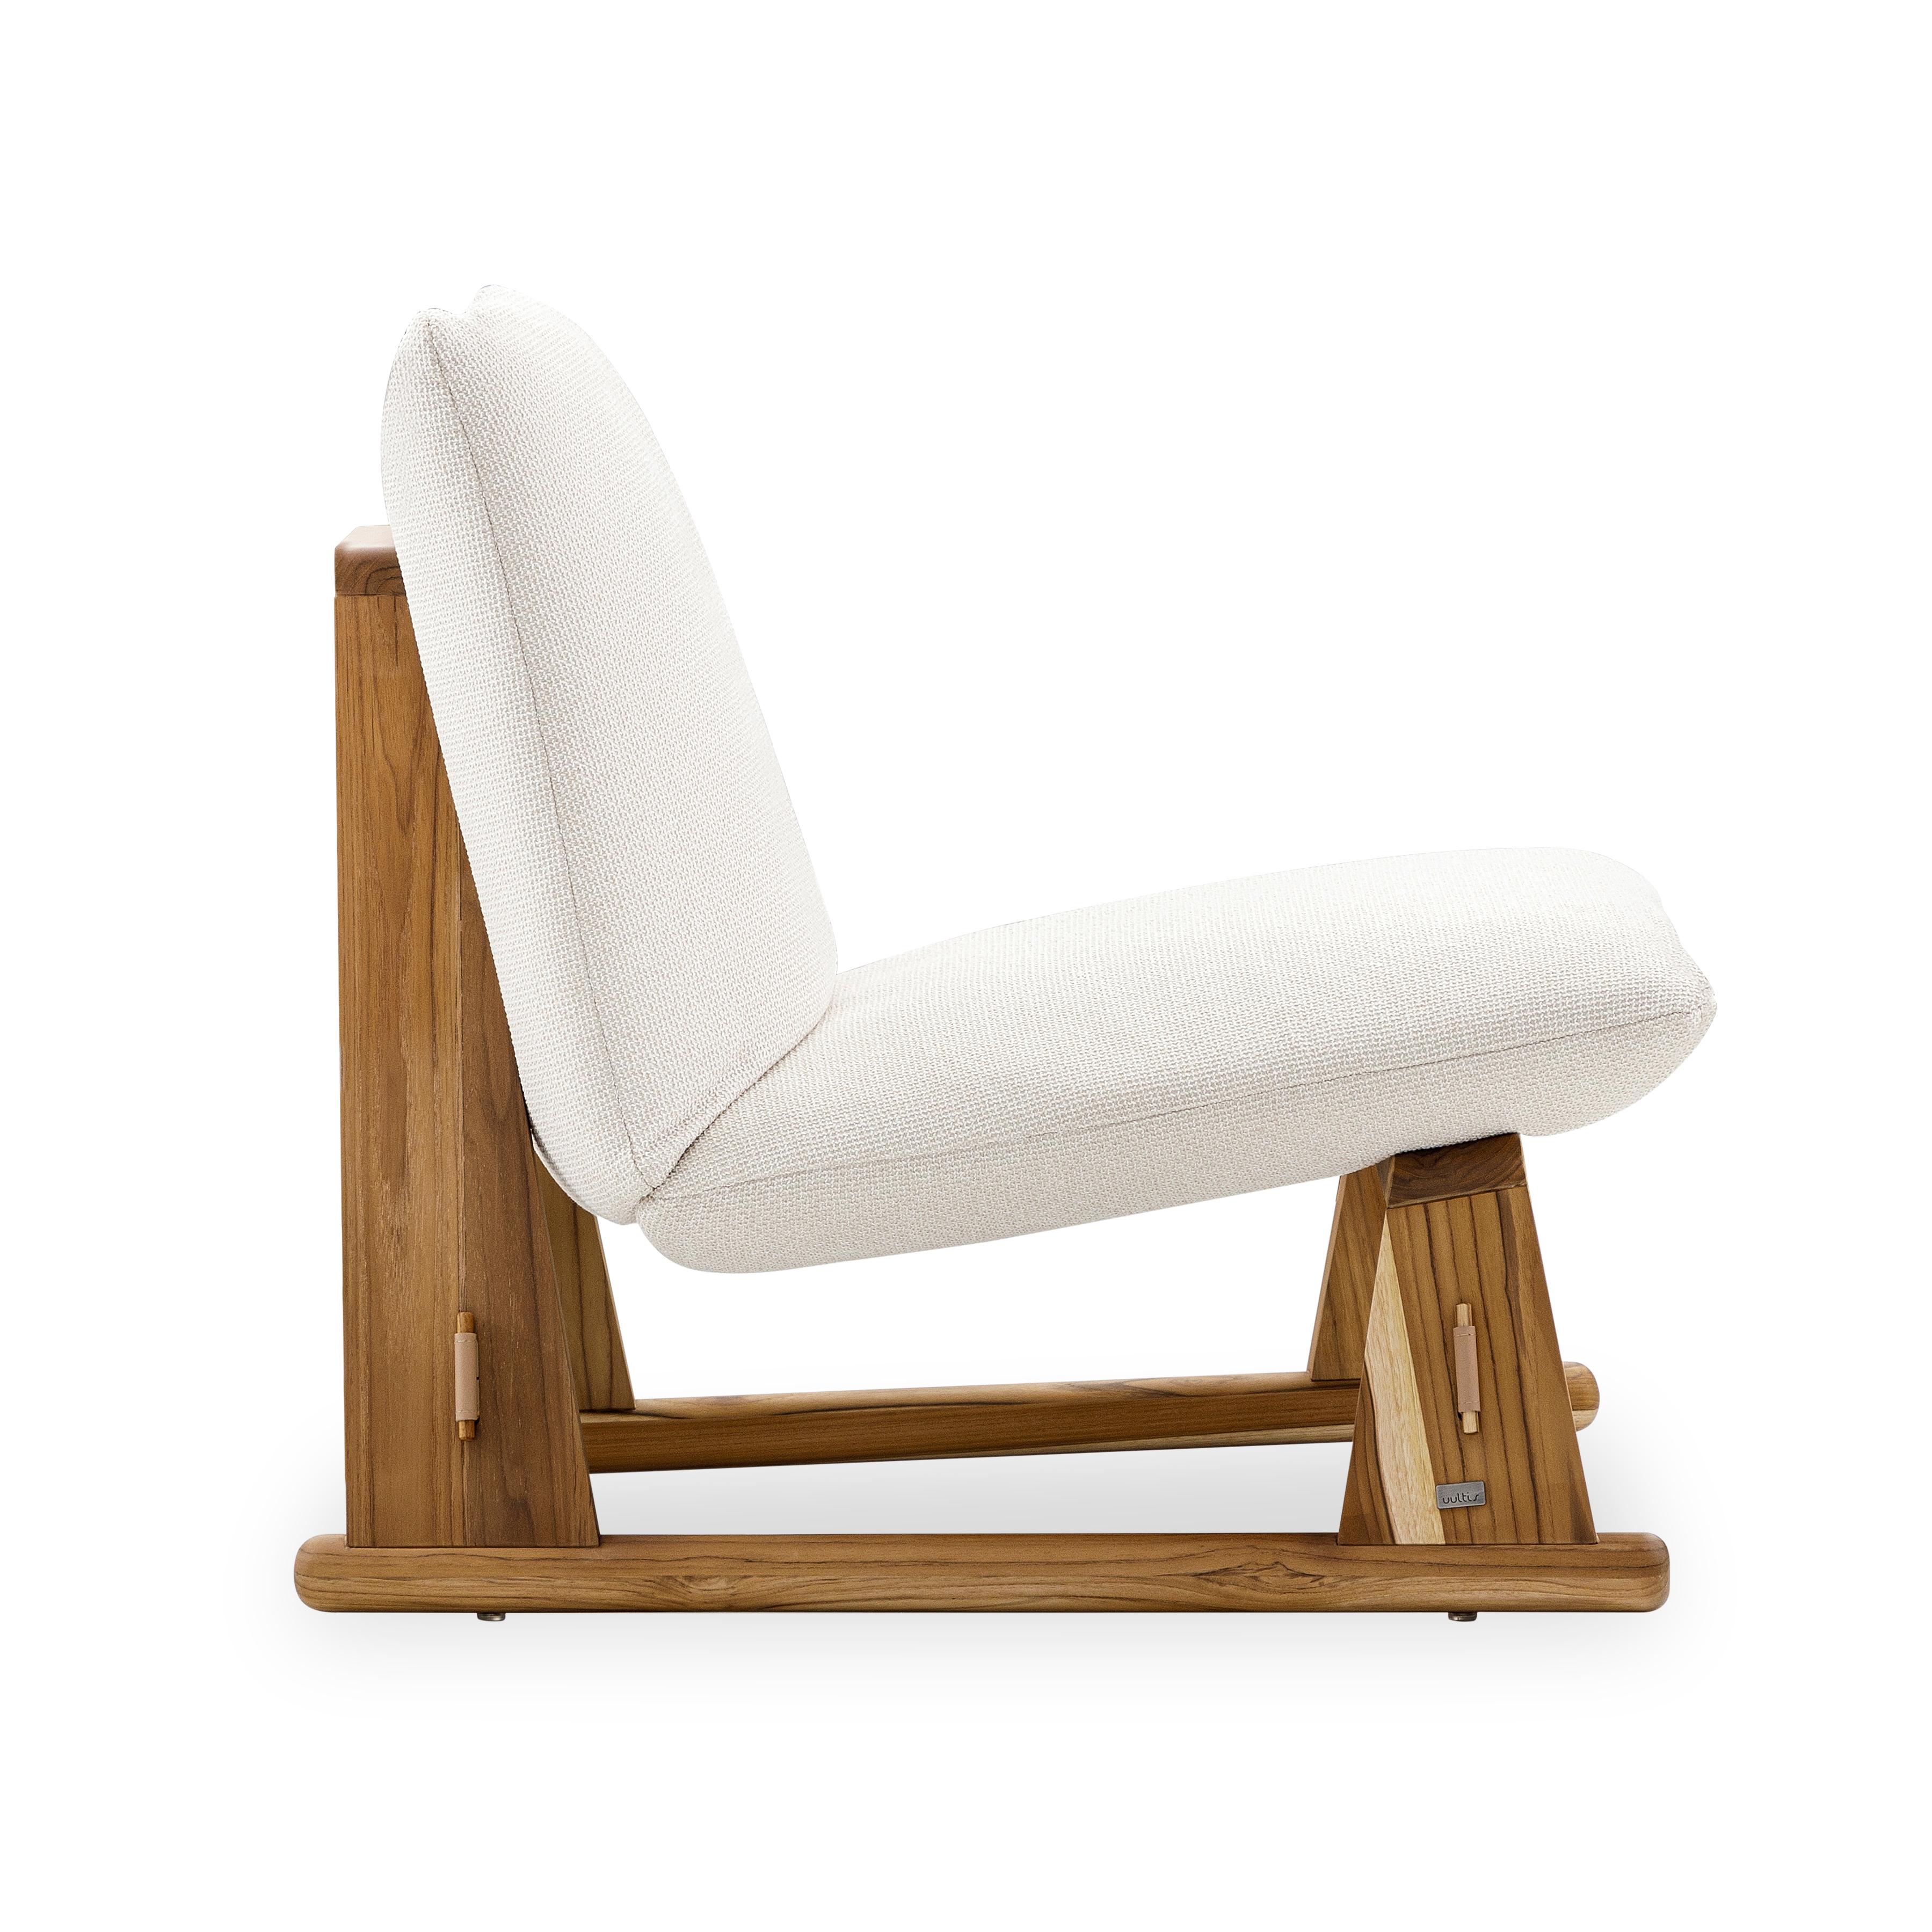 Brazilian Contemporary Maia Chair in Teak Wood Finish and White Fabric For Sale